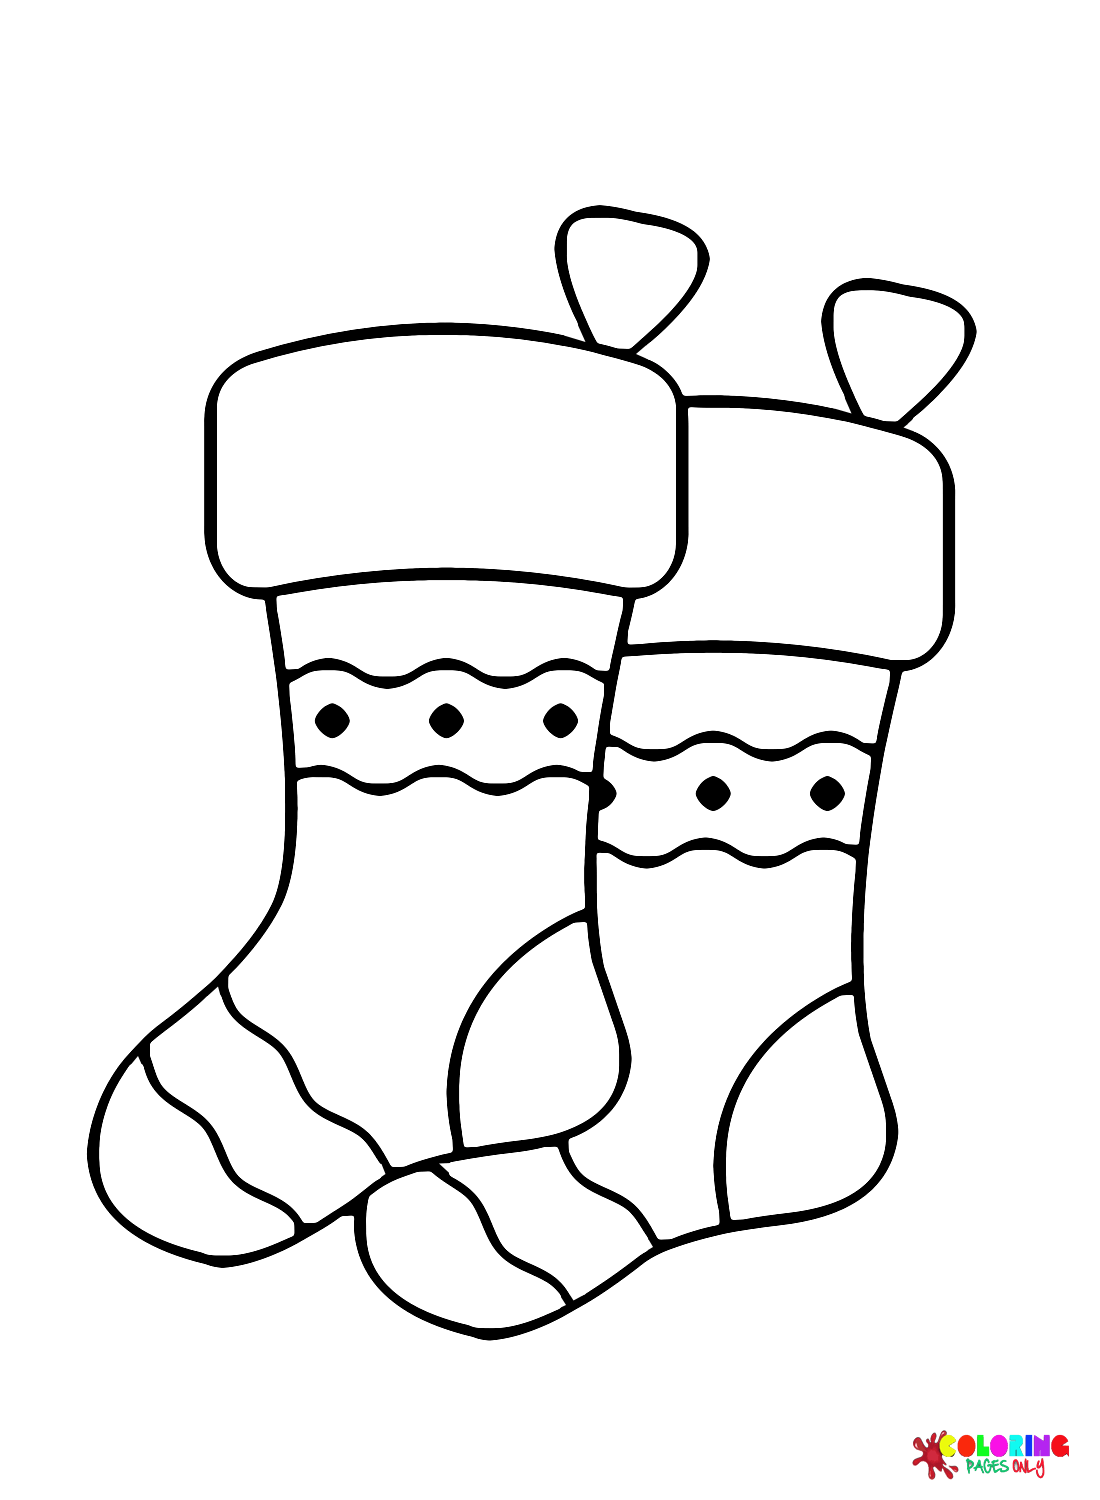 Pictures Christmas Socks Coloring Page - Free Printable Coloring Pages